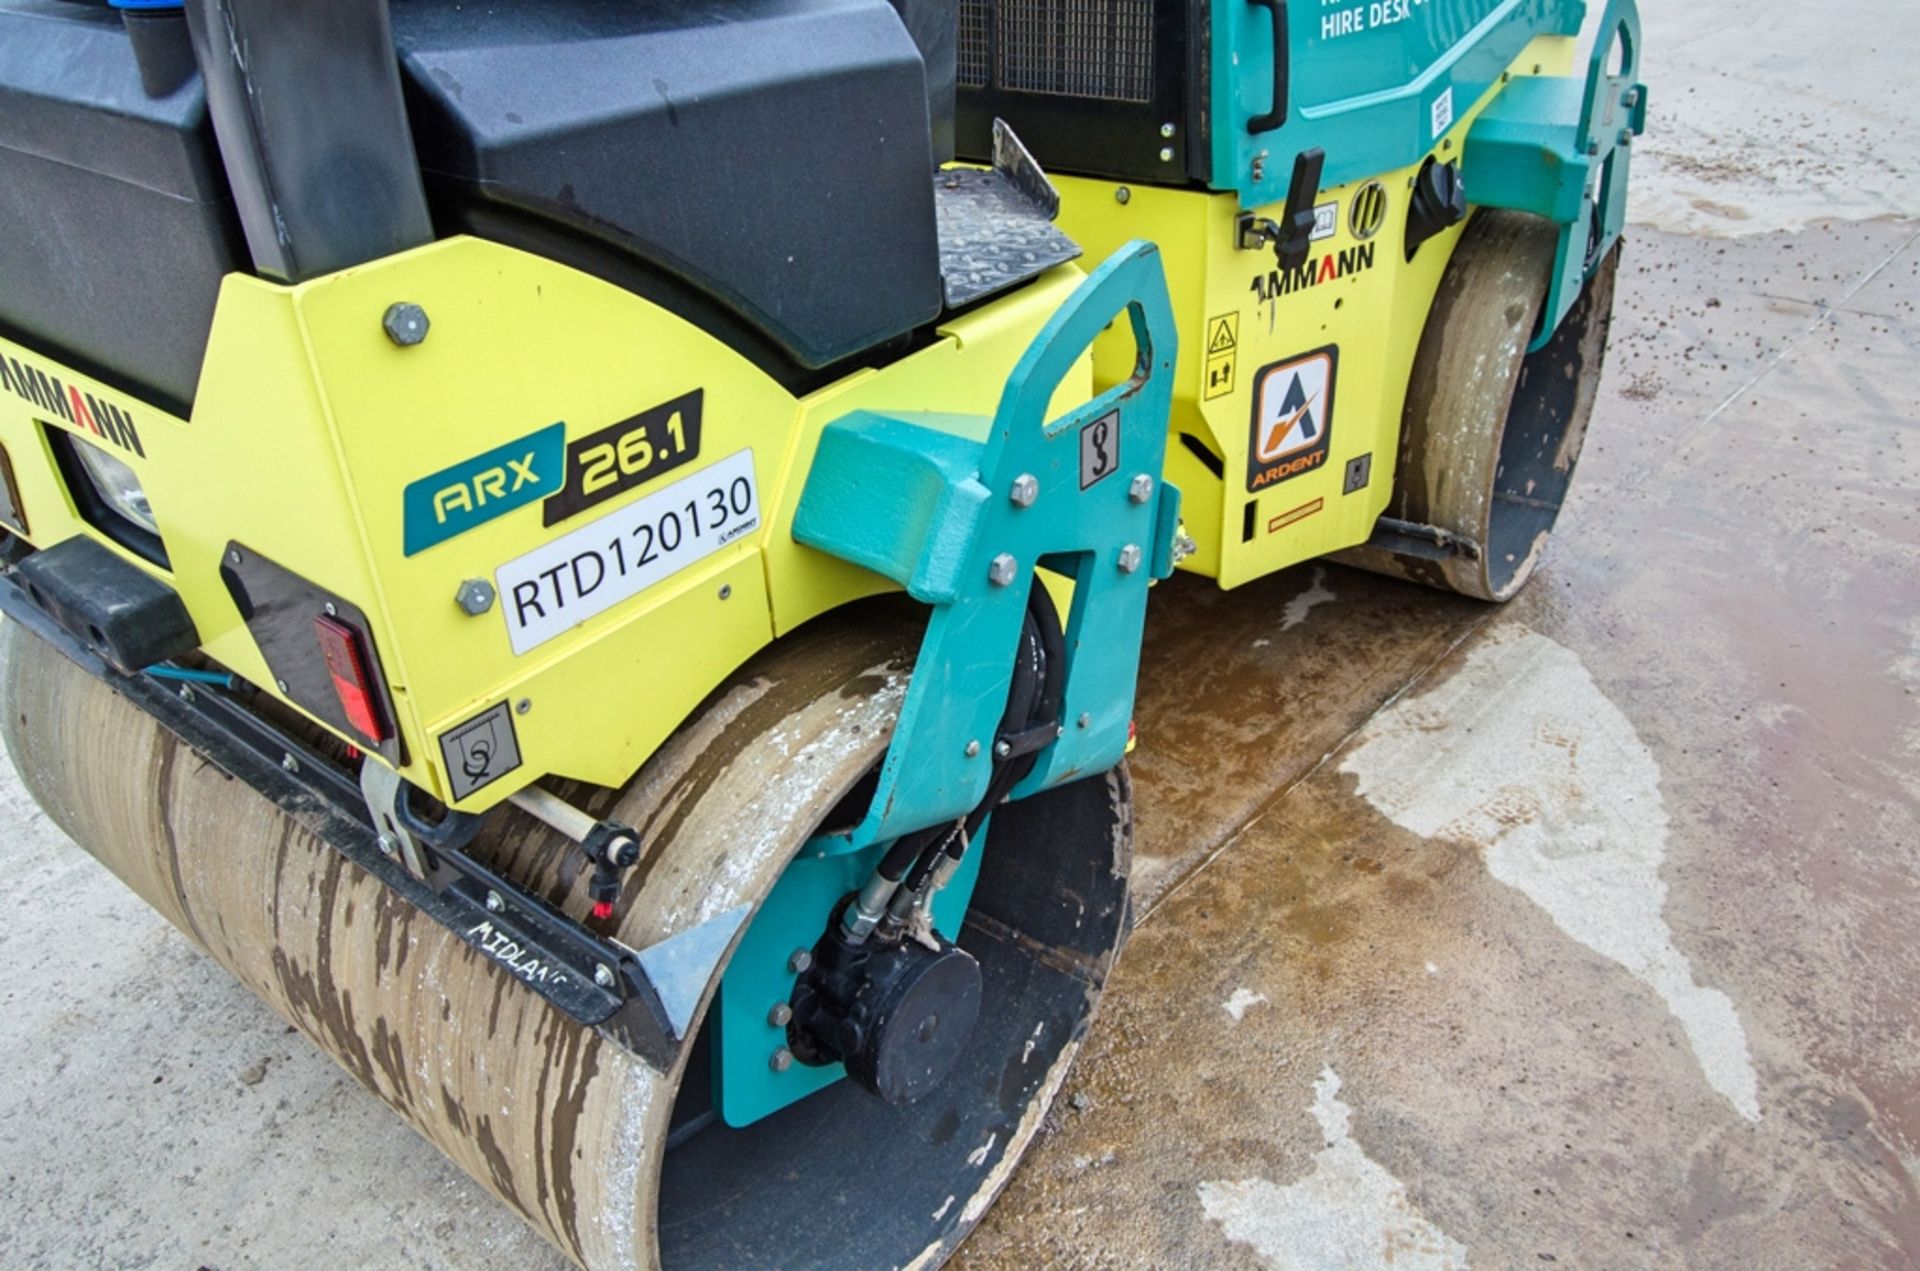 Ammann ARX 26-1 double drum ride on roller Year: 2022 S/N: 3023580 Recorded Hours: 225 RTD120130 - Image 10 of 21